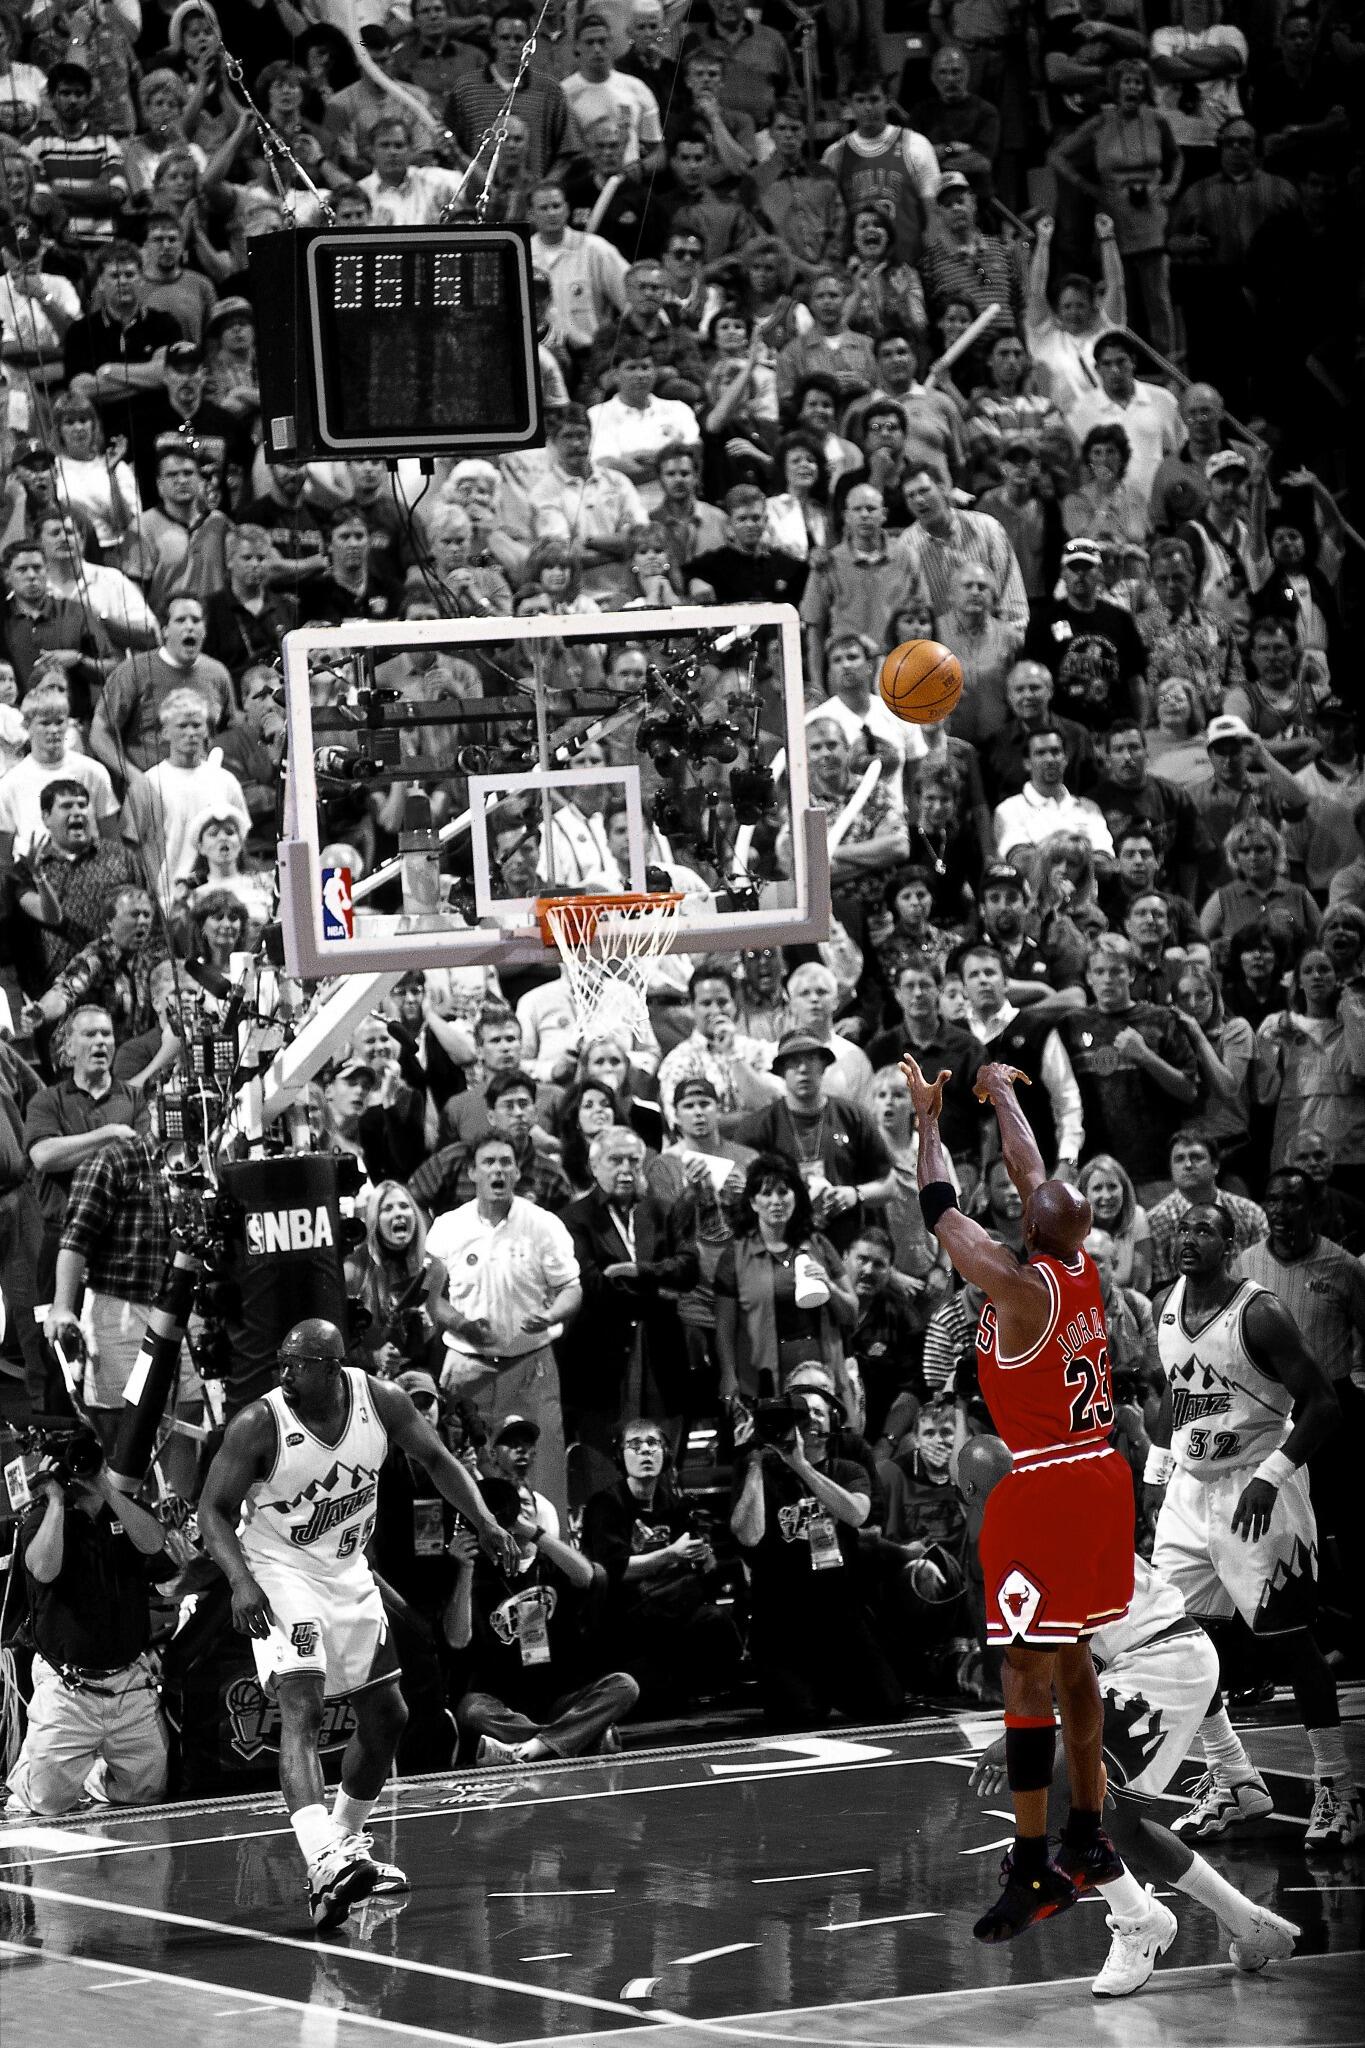 SportsCenter years ago today, Michael Jordan won his 6th NBA title with the Bulls by hitting this shot to beat the Jazz